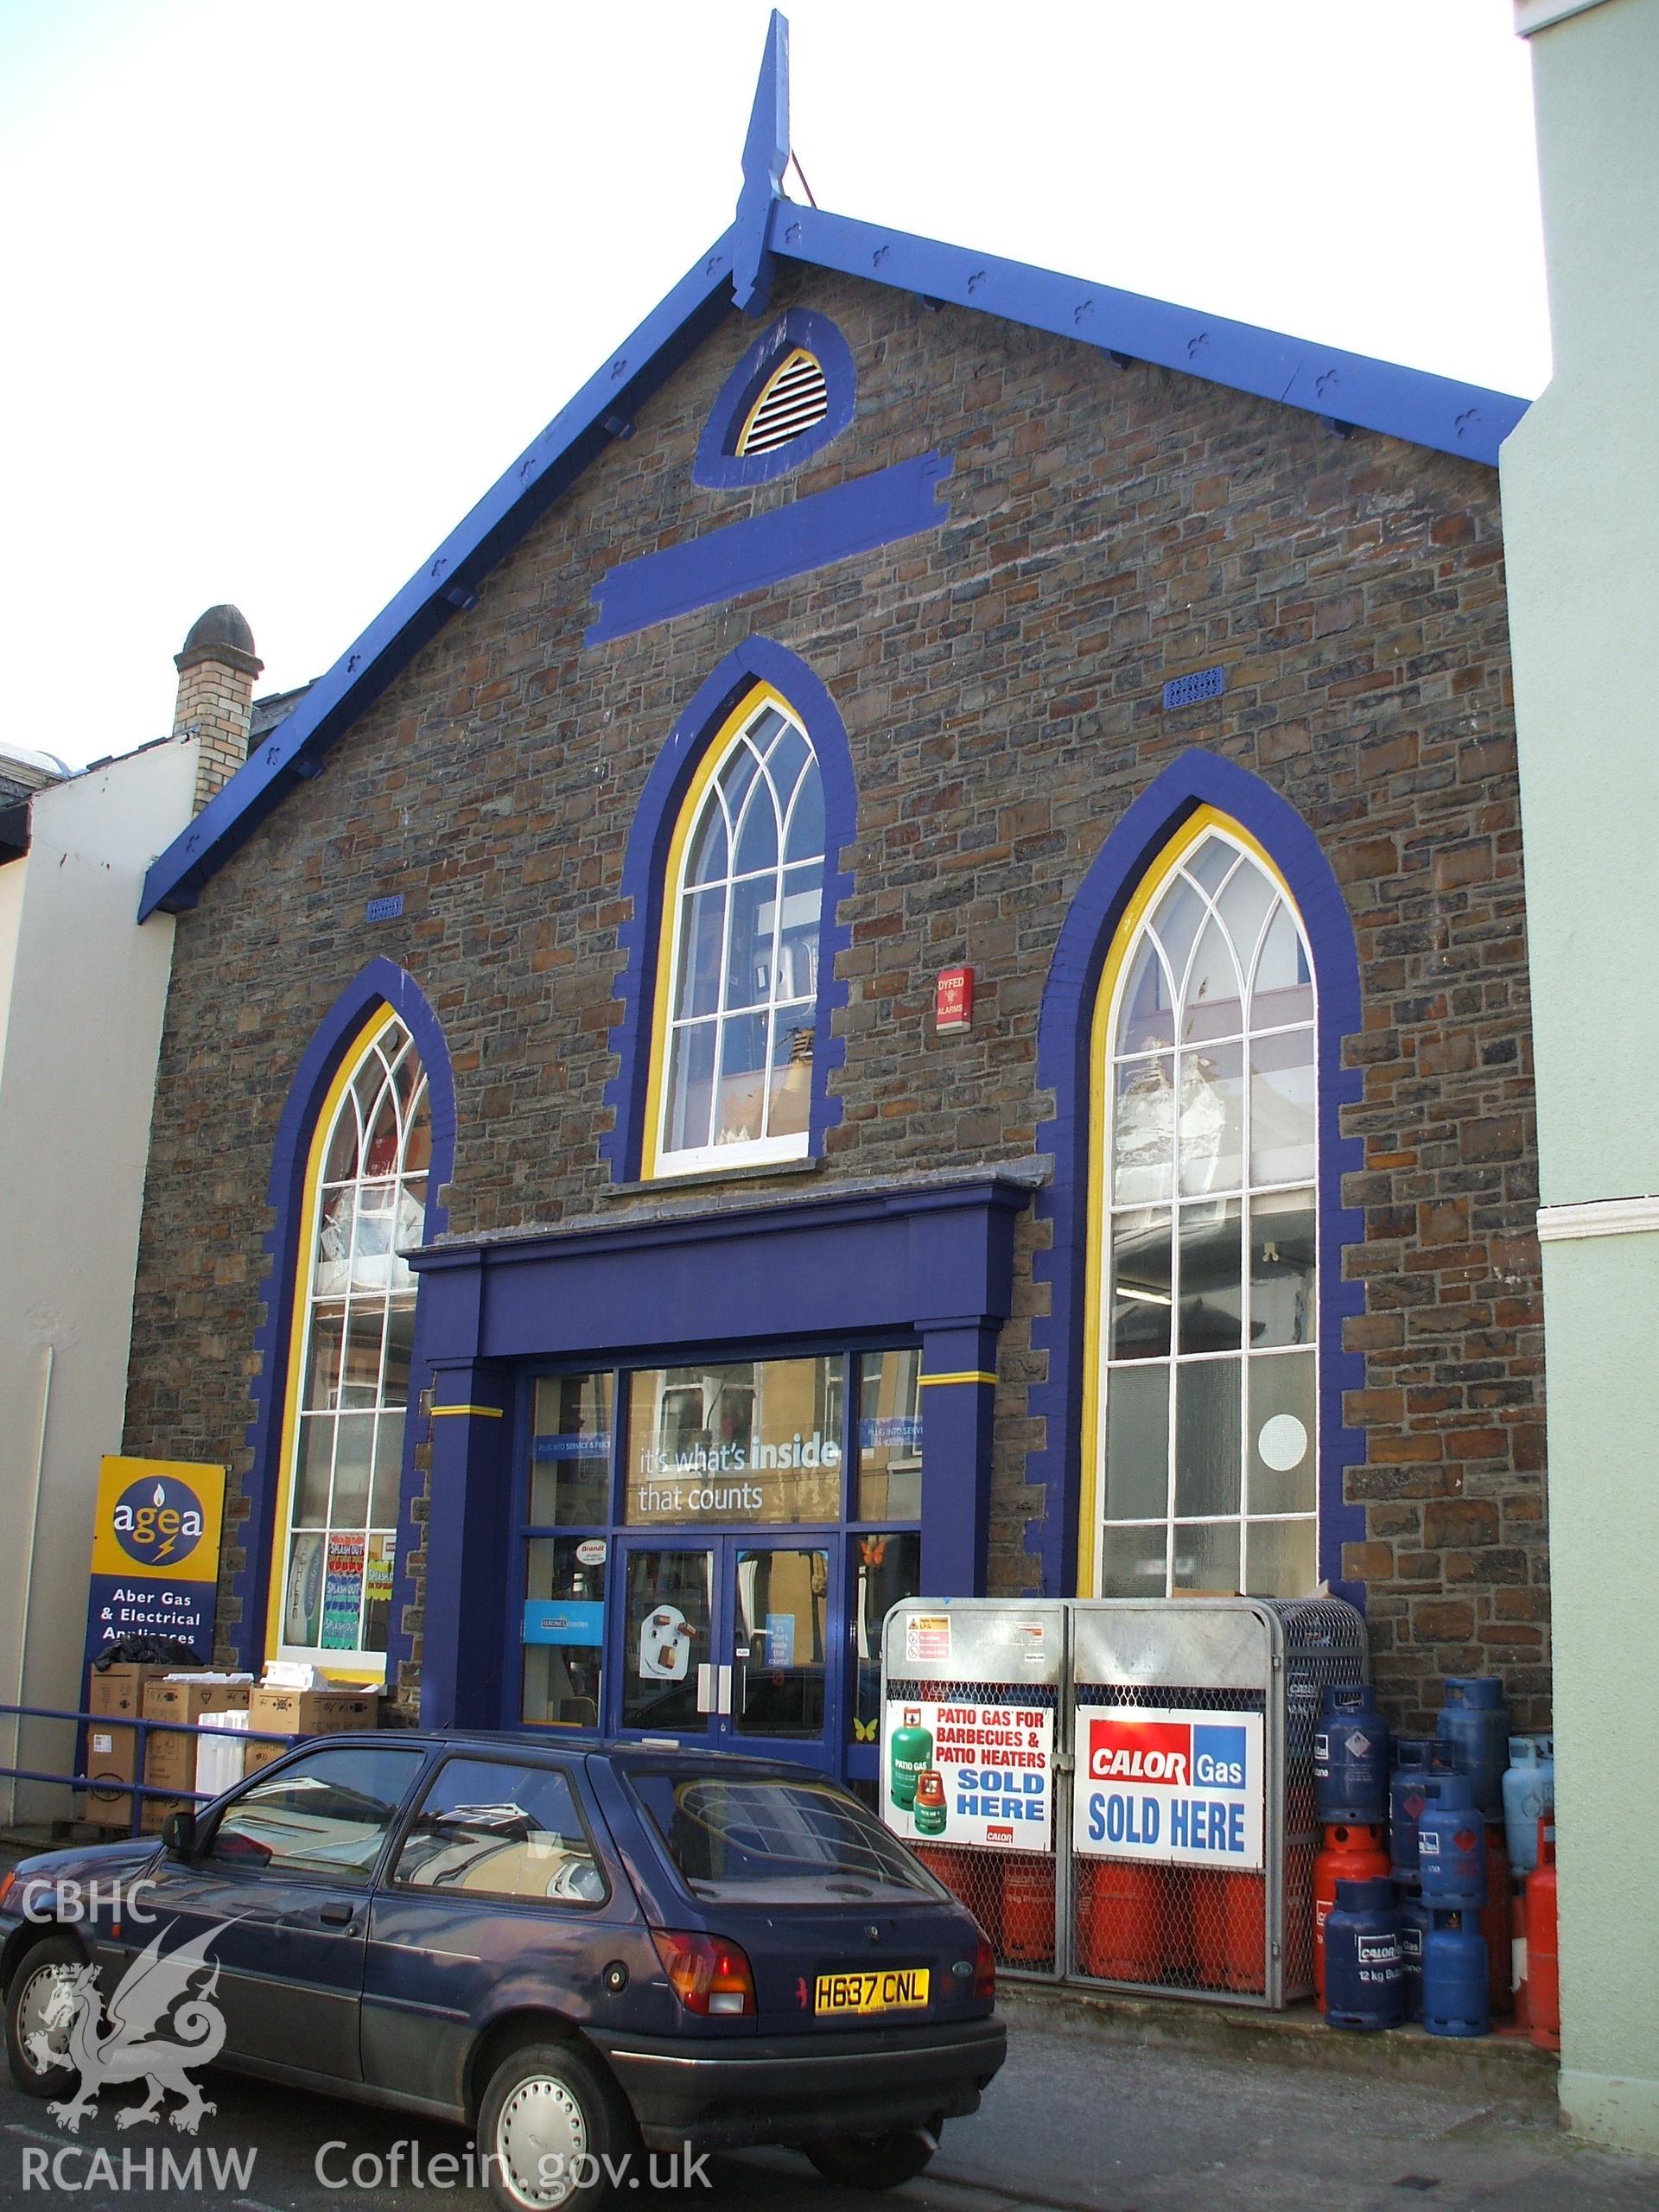 Colour digital photograph showing the front exterior of Siloam Methodist Chapel, Cambrian Street, Aberystwyth.